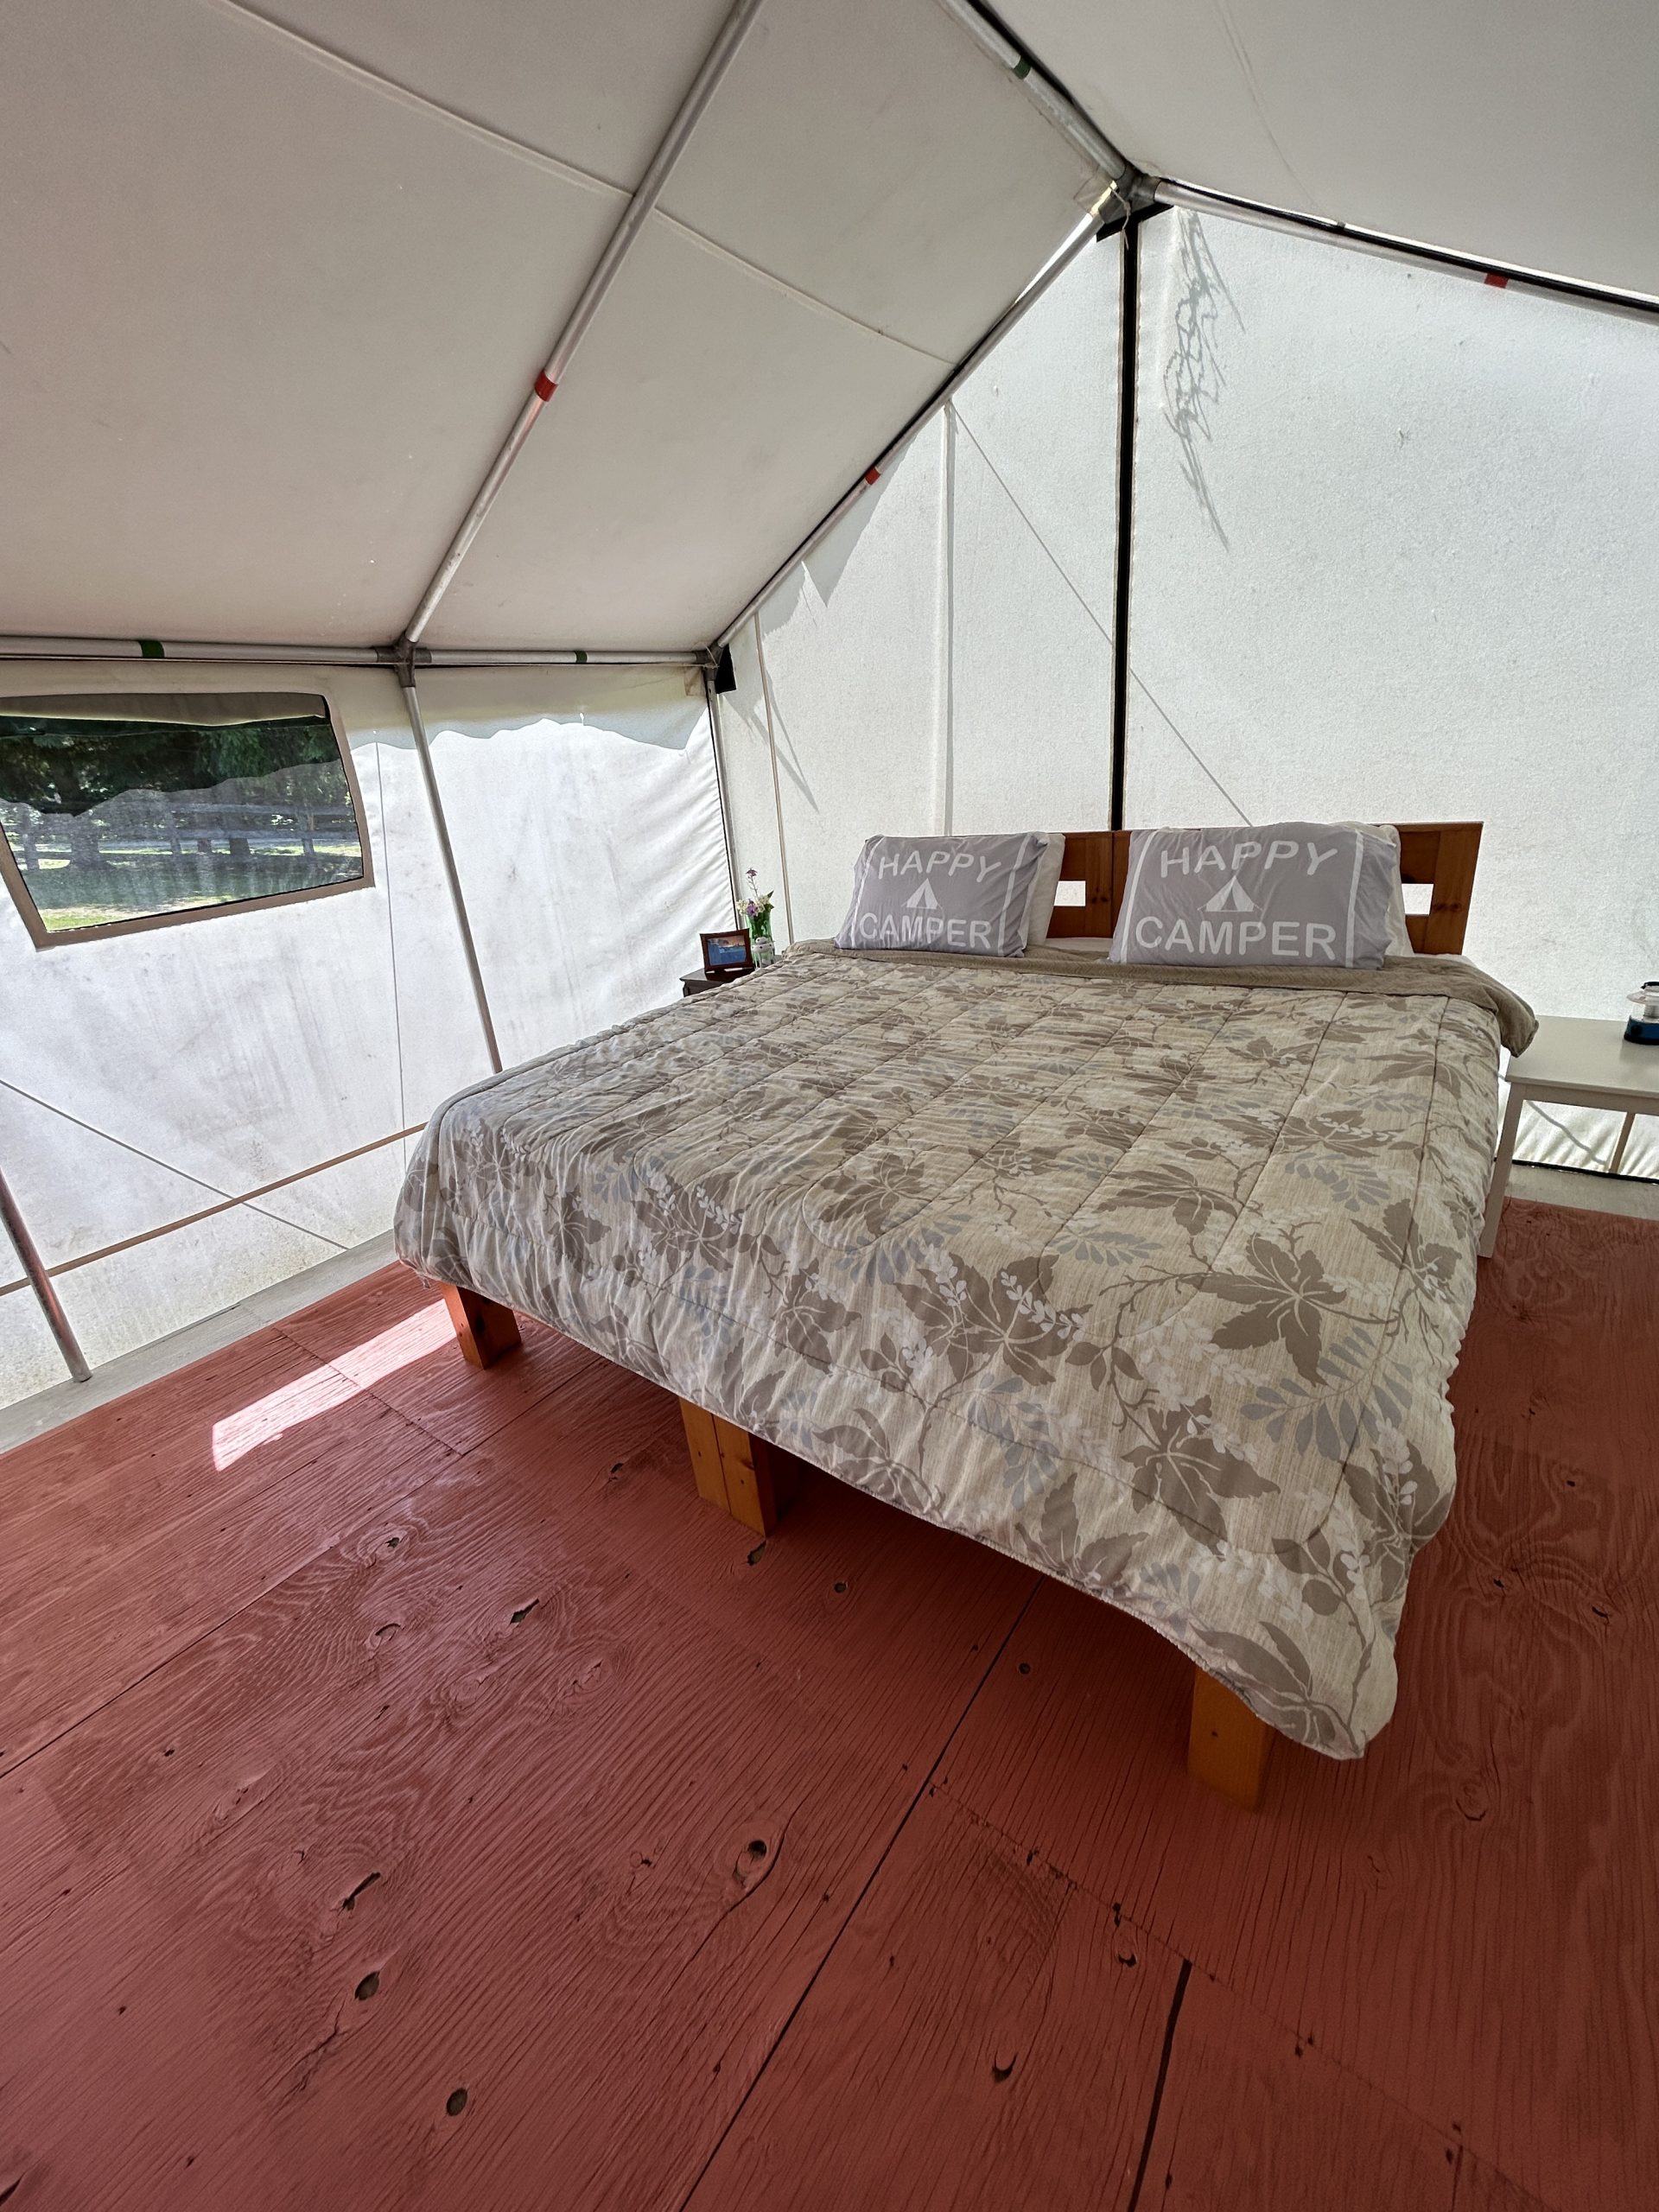 King bed inside The Gorge Tent in the pasture of Irvineside Farm.